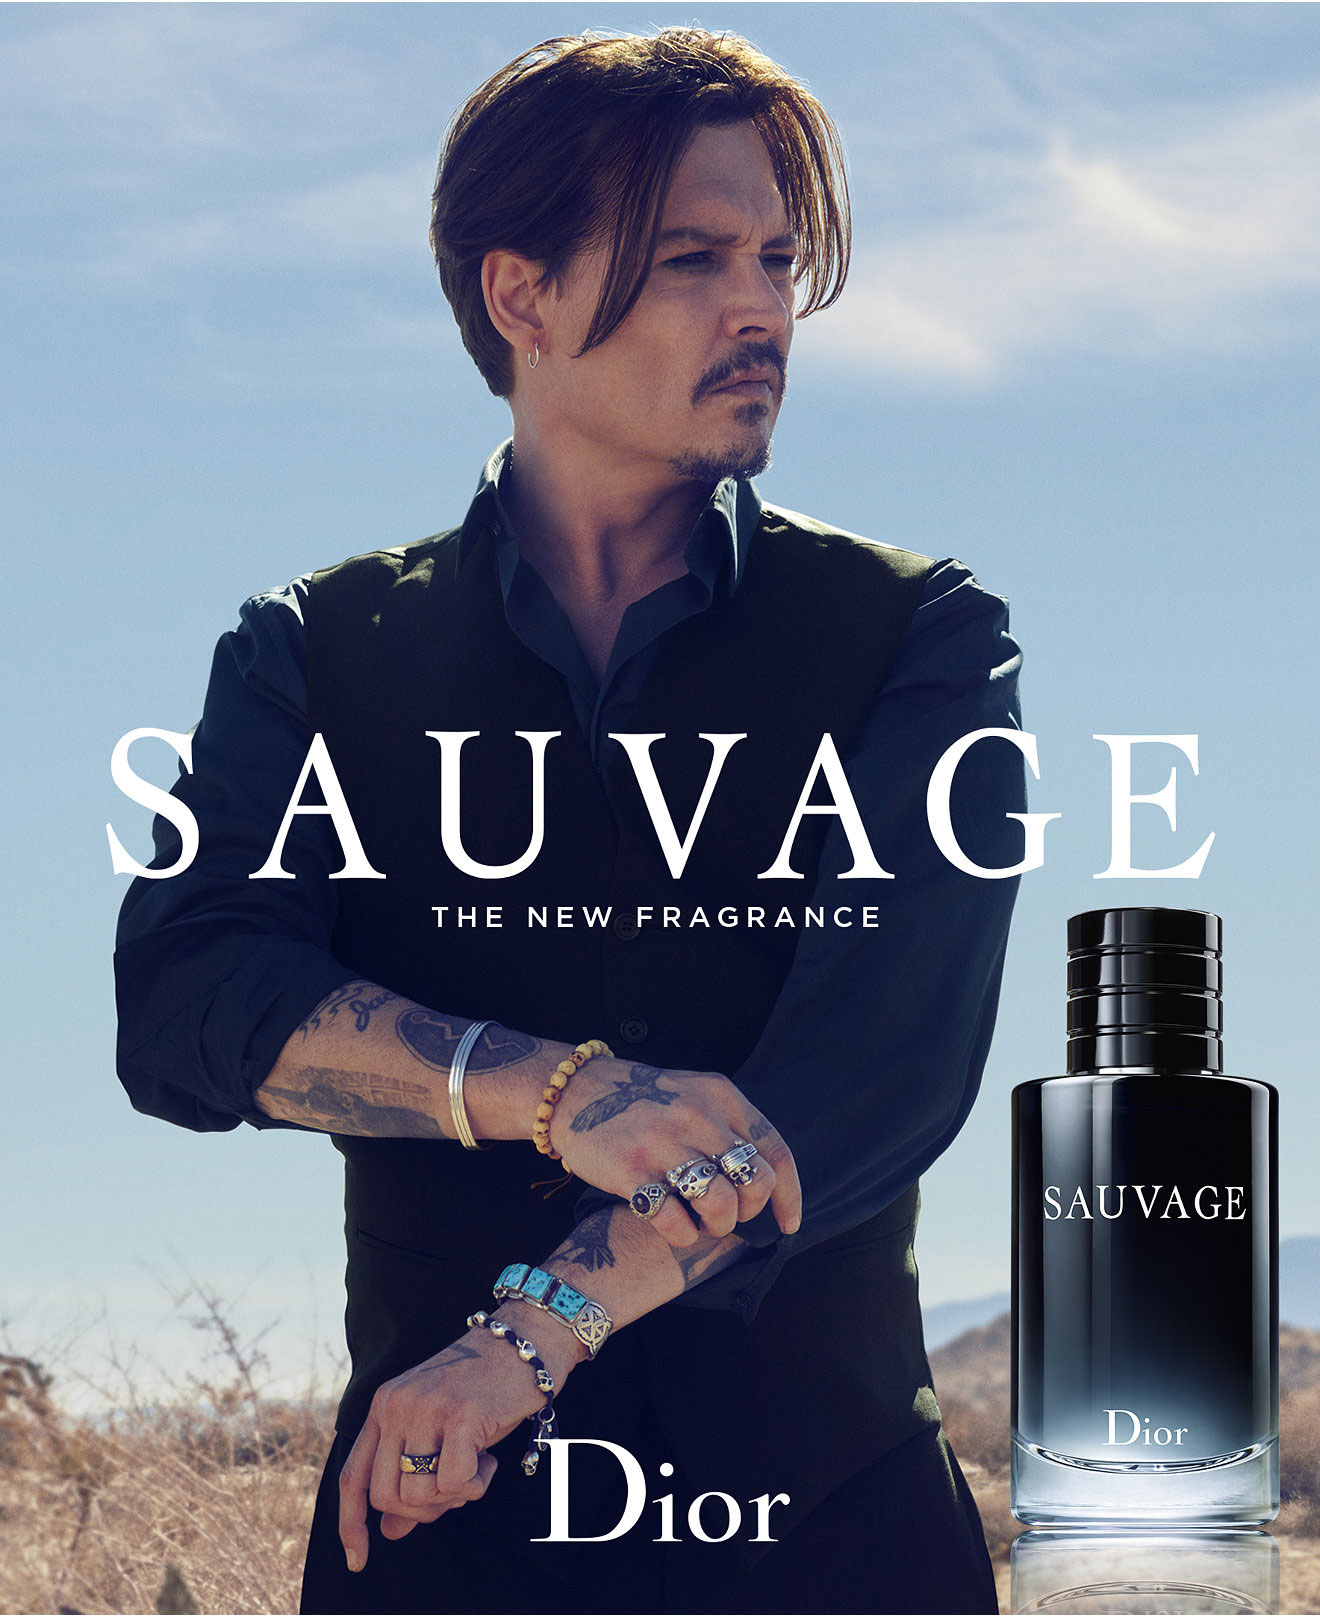 Dior Sauvage - Perfumes, Colognes, Parfums, Scents resource guide - The